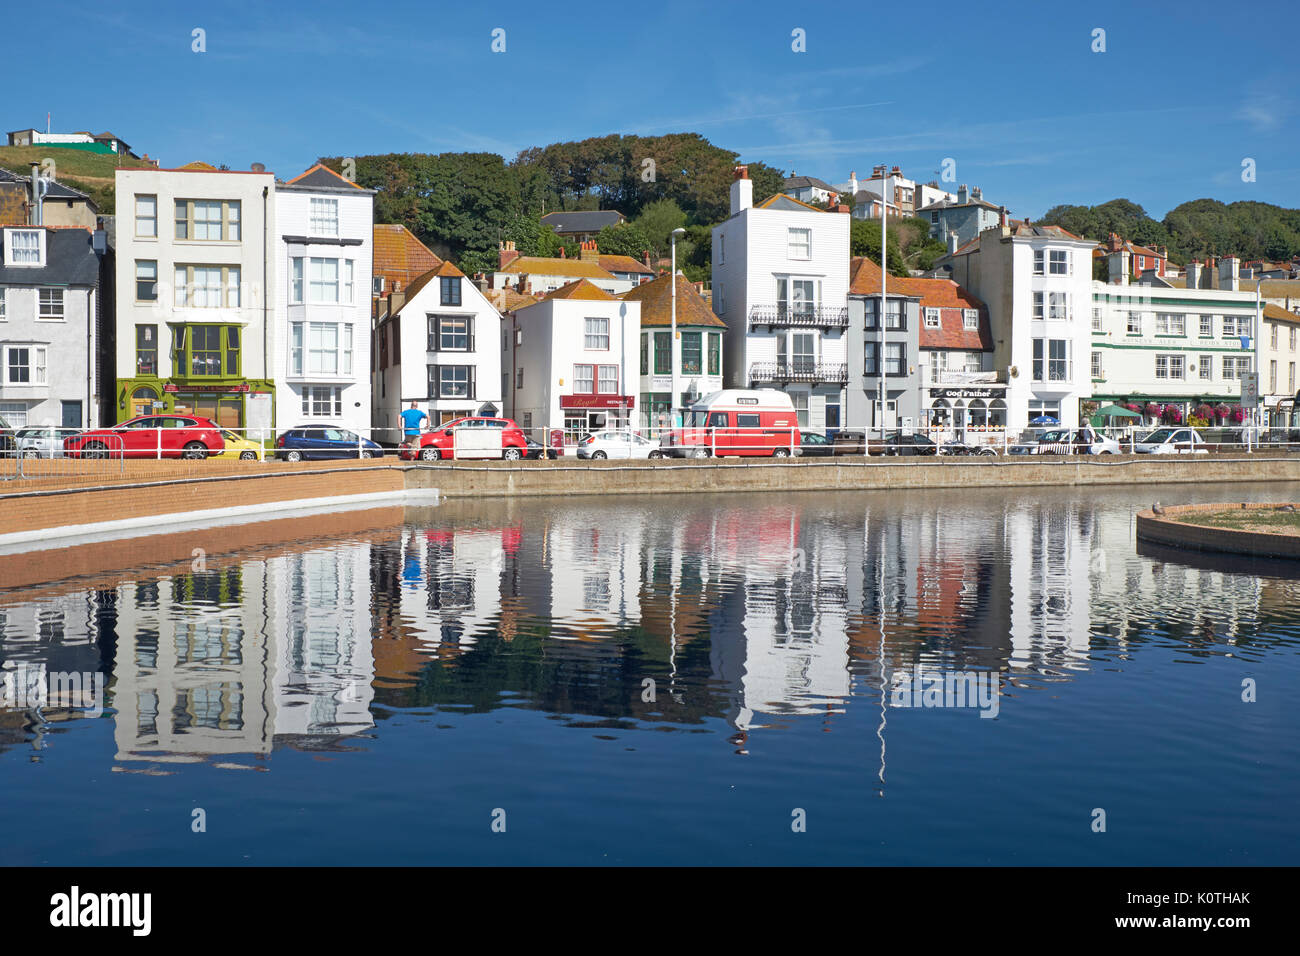 Hastings seafront promenade and houses reflected in the boating lake, East Sussex, UK, GB Stock Photo